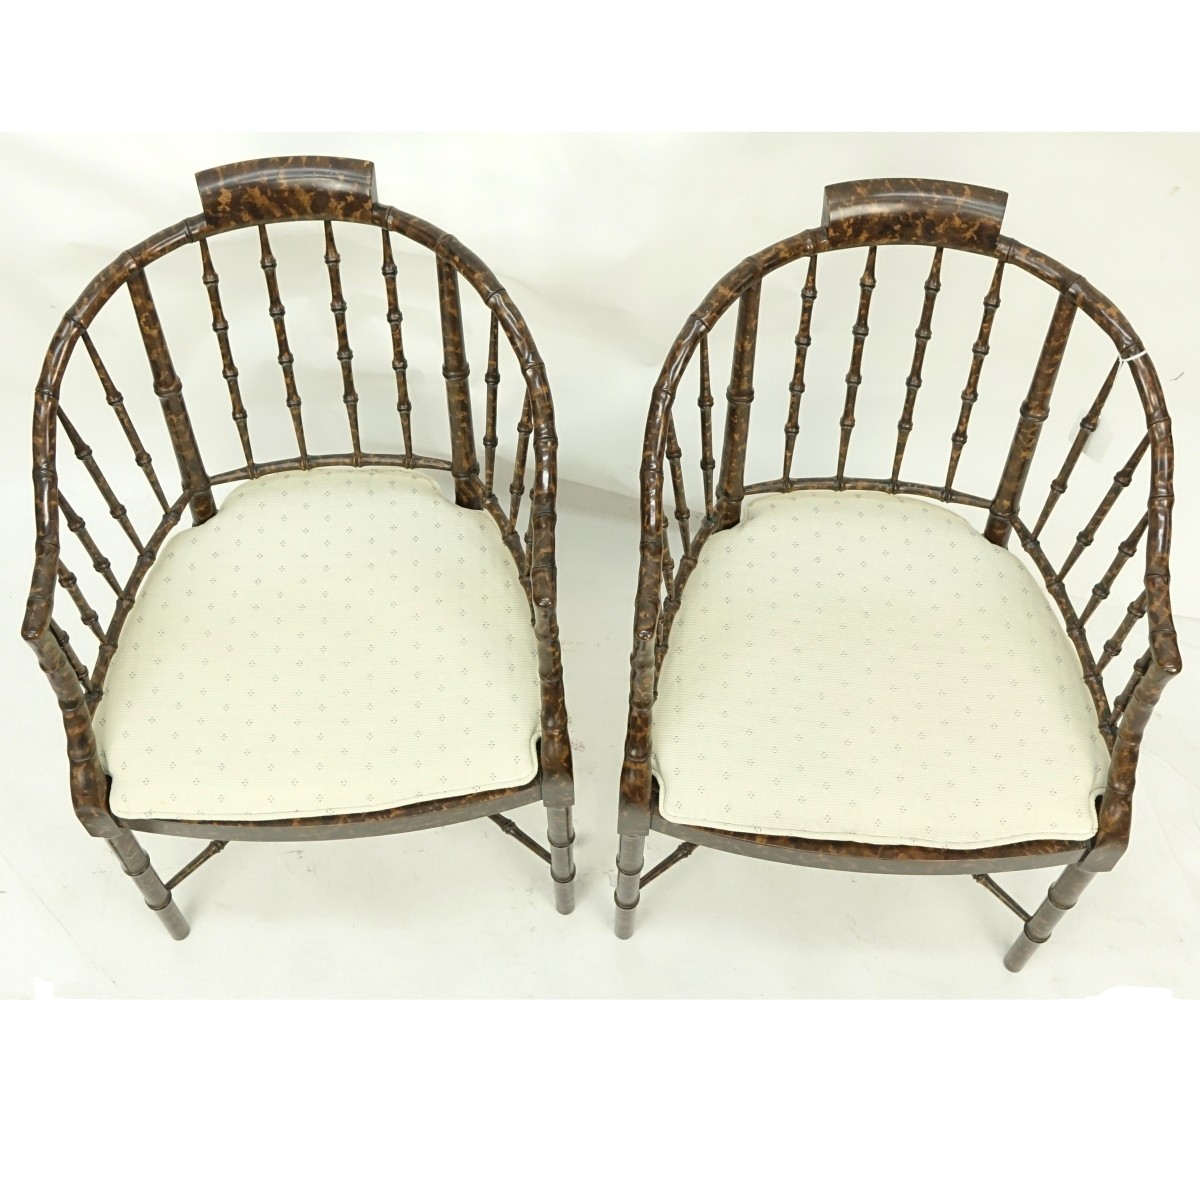 Pair of Faux Tortoise Bamboo Stylized Armchairs